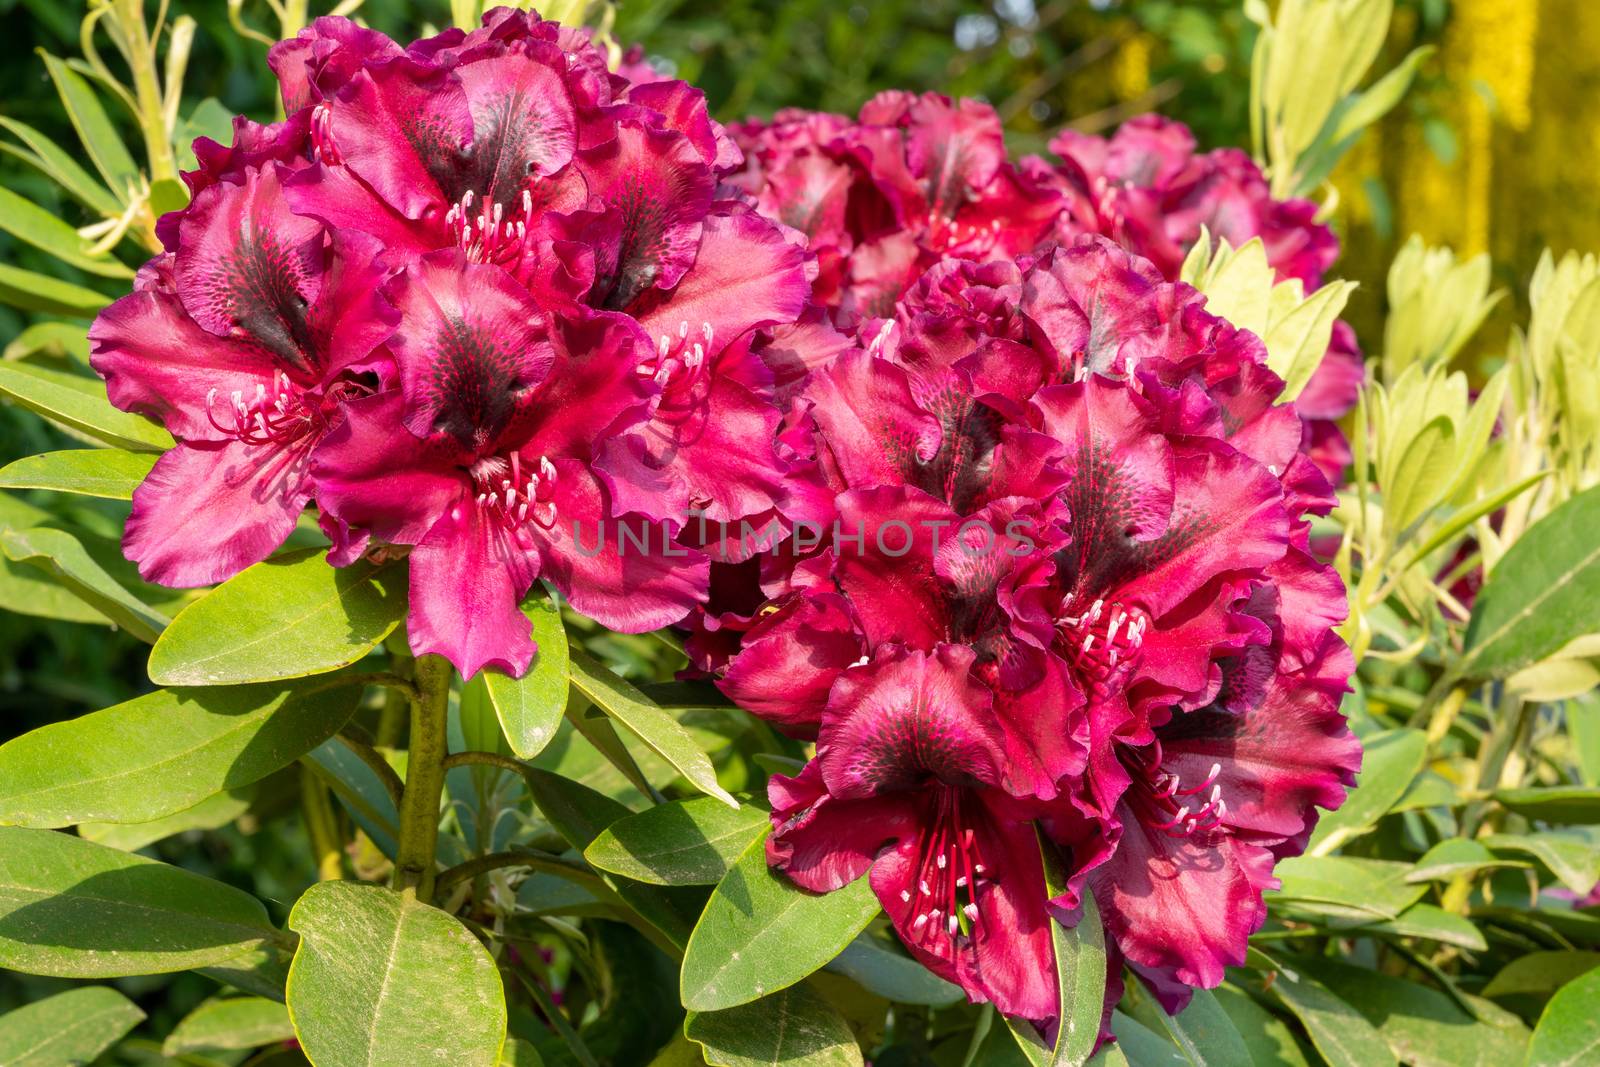 Rhododendron Hybrid Midnight Beauty (Rhododendron hybride)